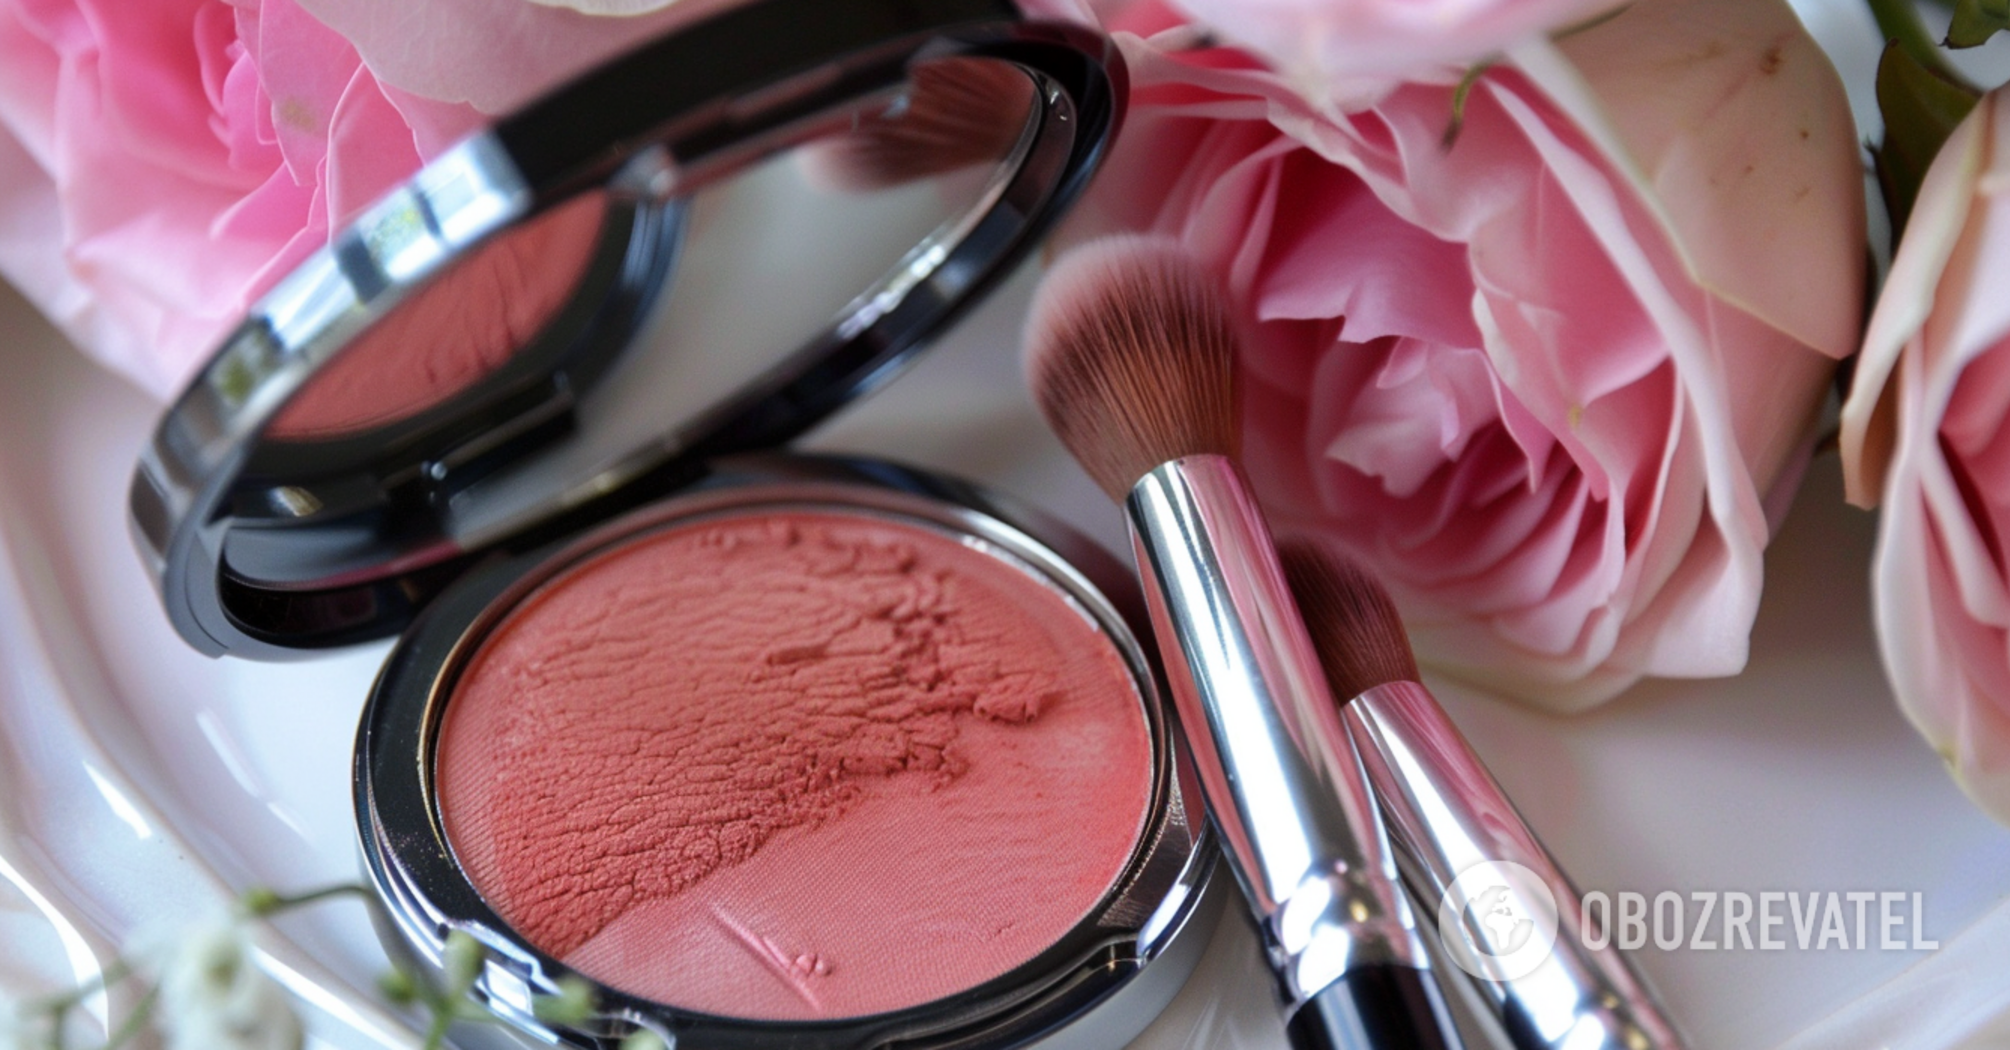 A new way of applying blush will provide natural makeup: what's the point